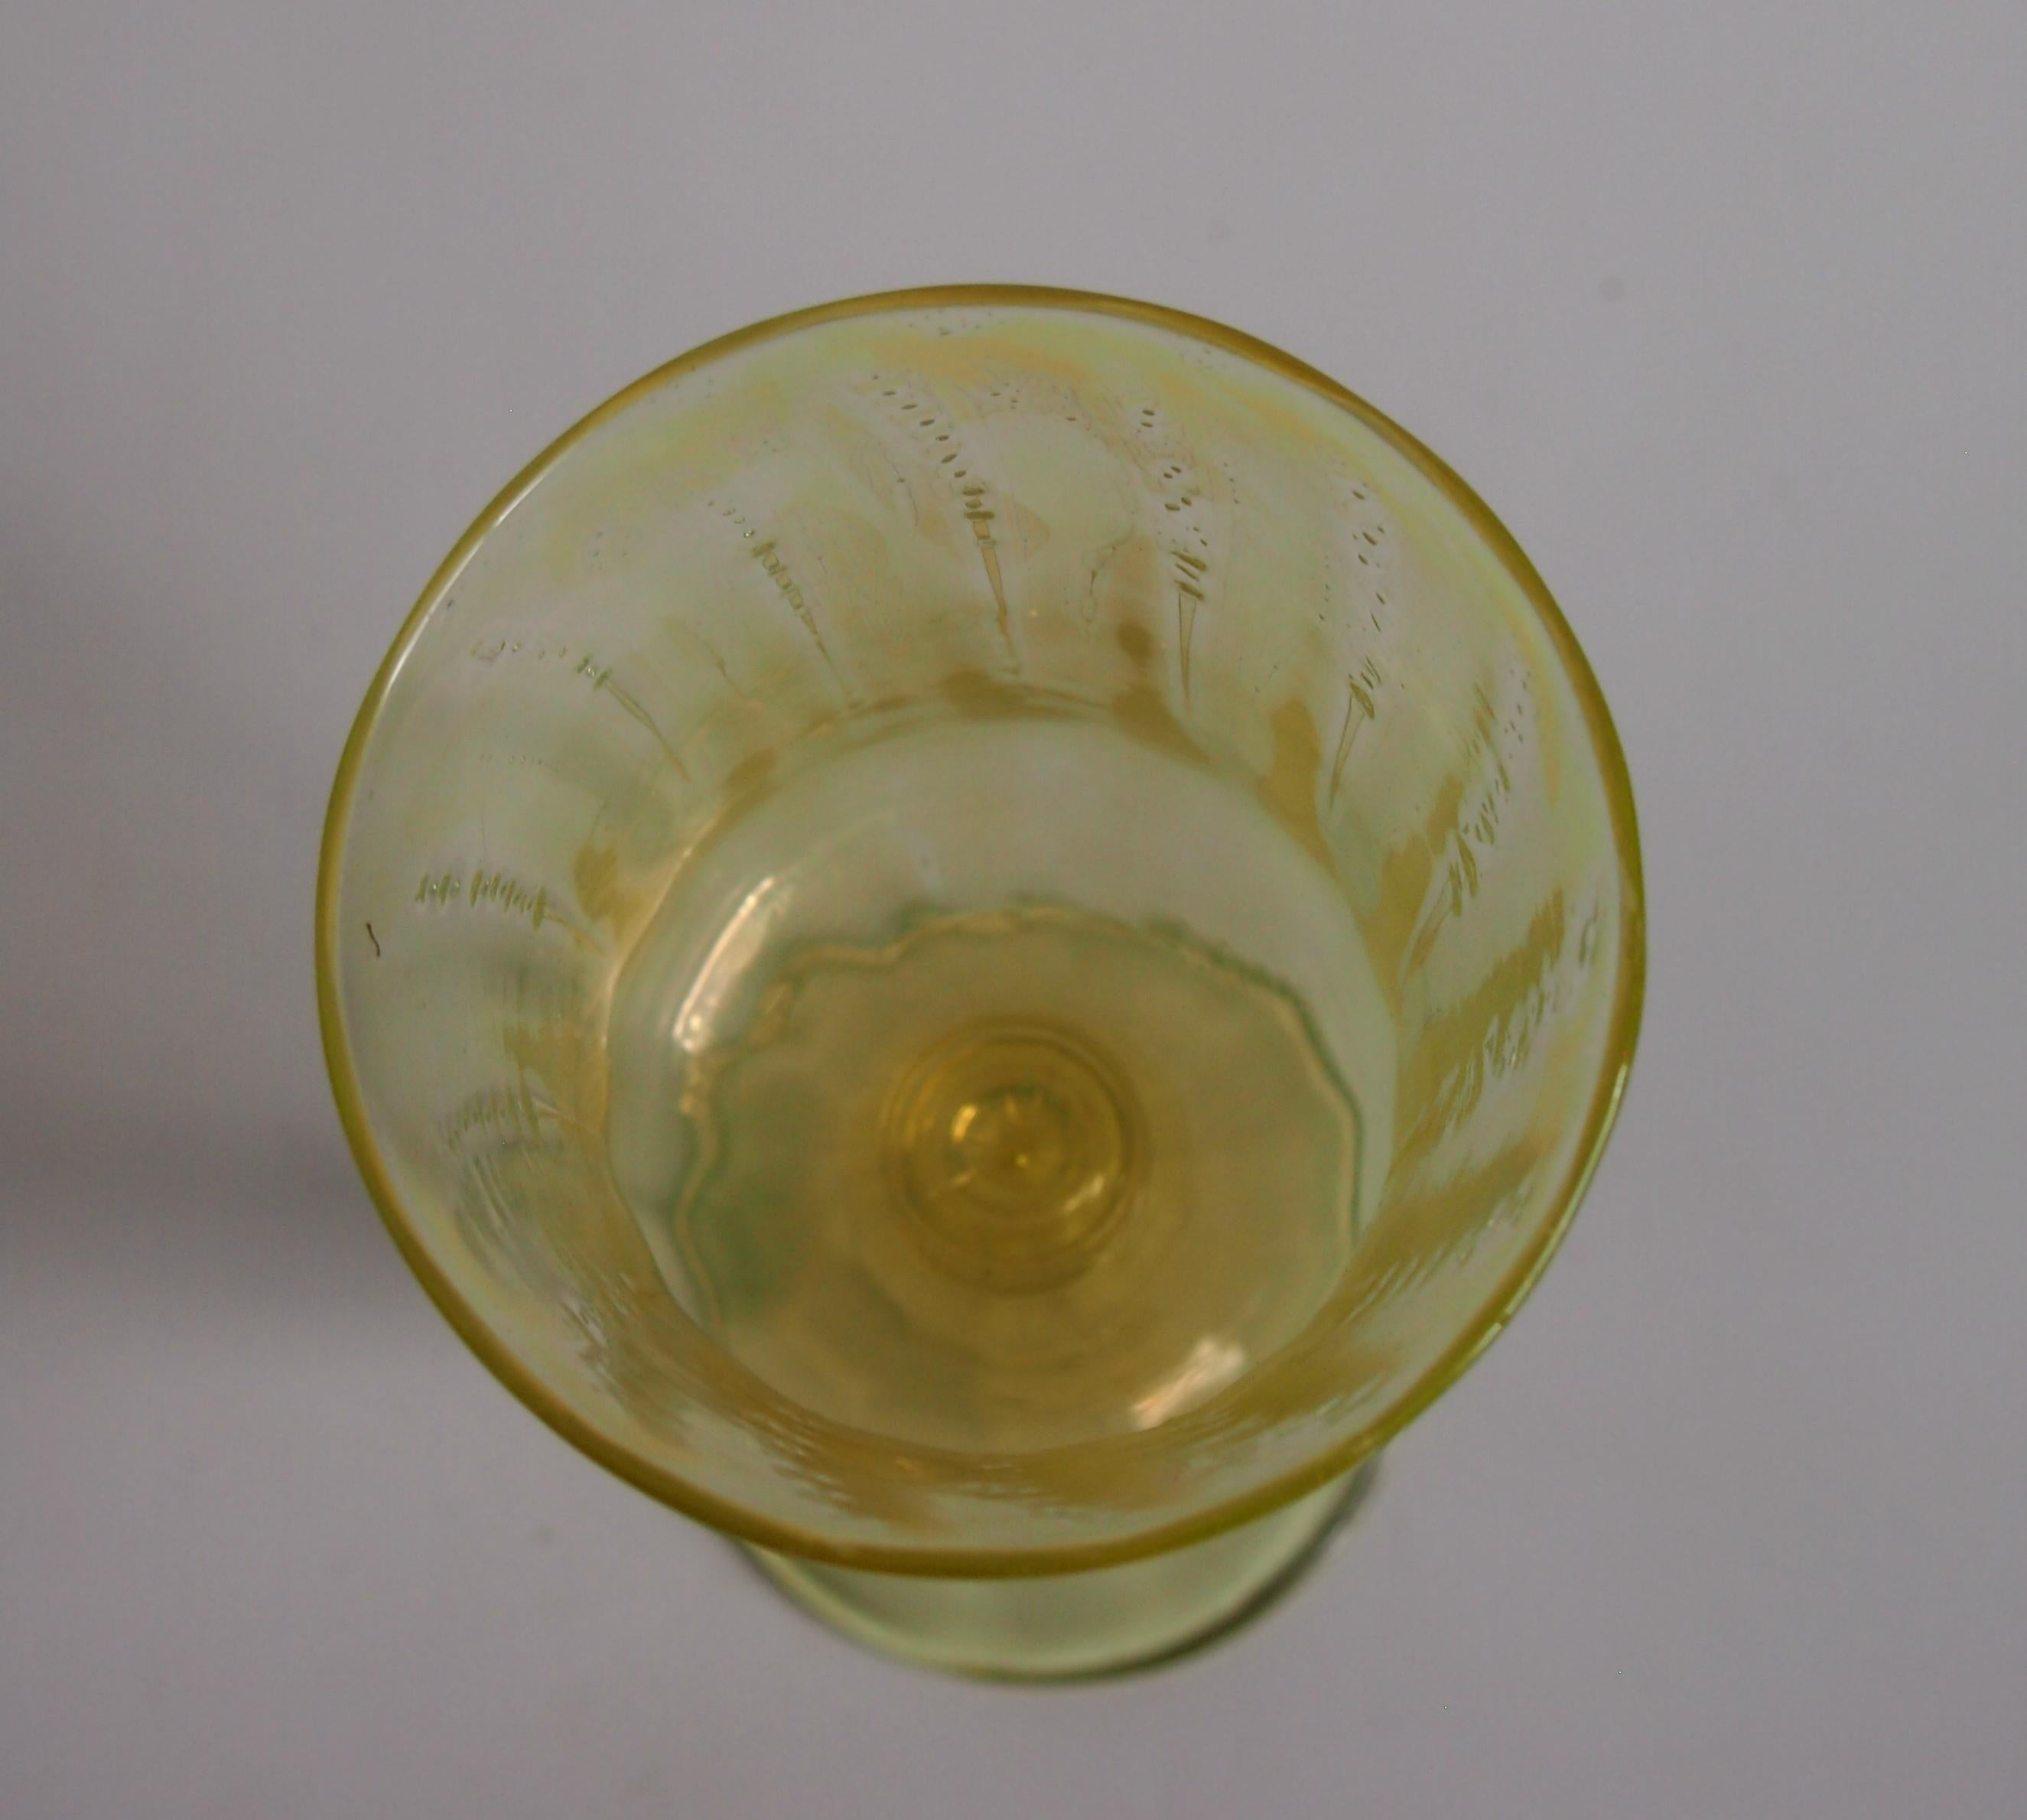 Early 20th Century Louis Comfort Tiffany Straw Opal Art Nouveau Favrile Wine Glass For Sale